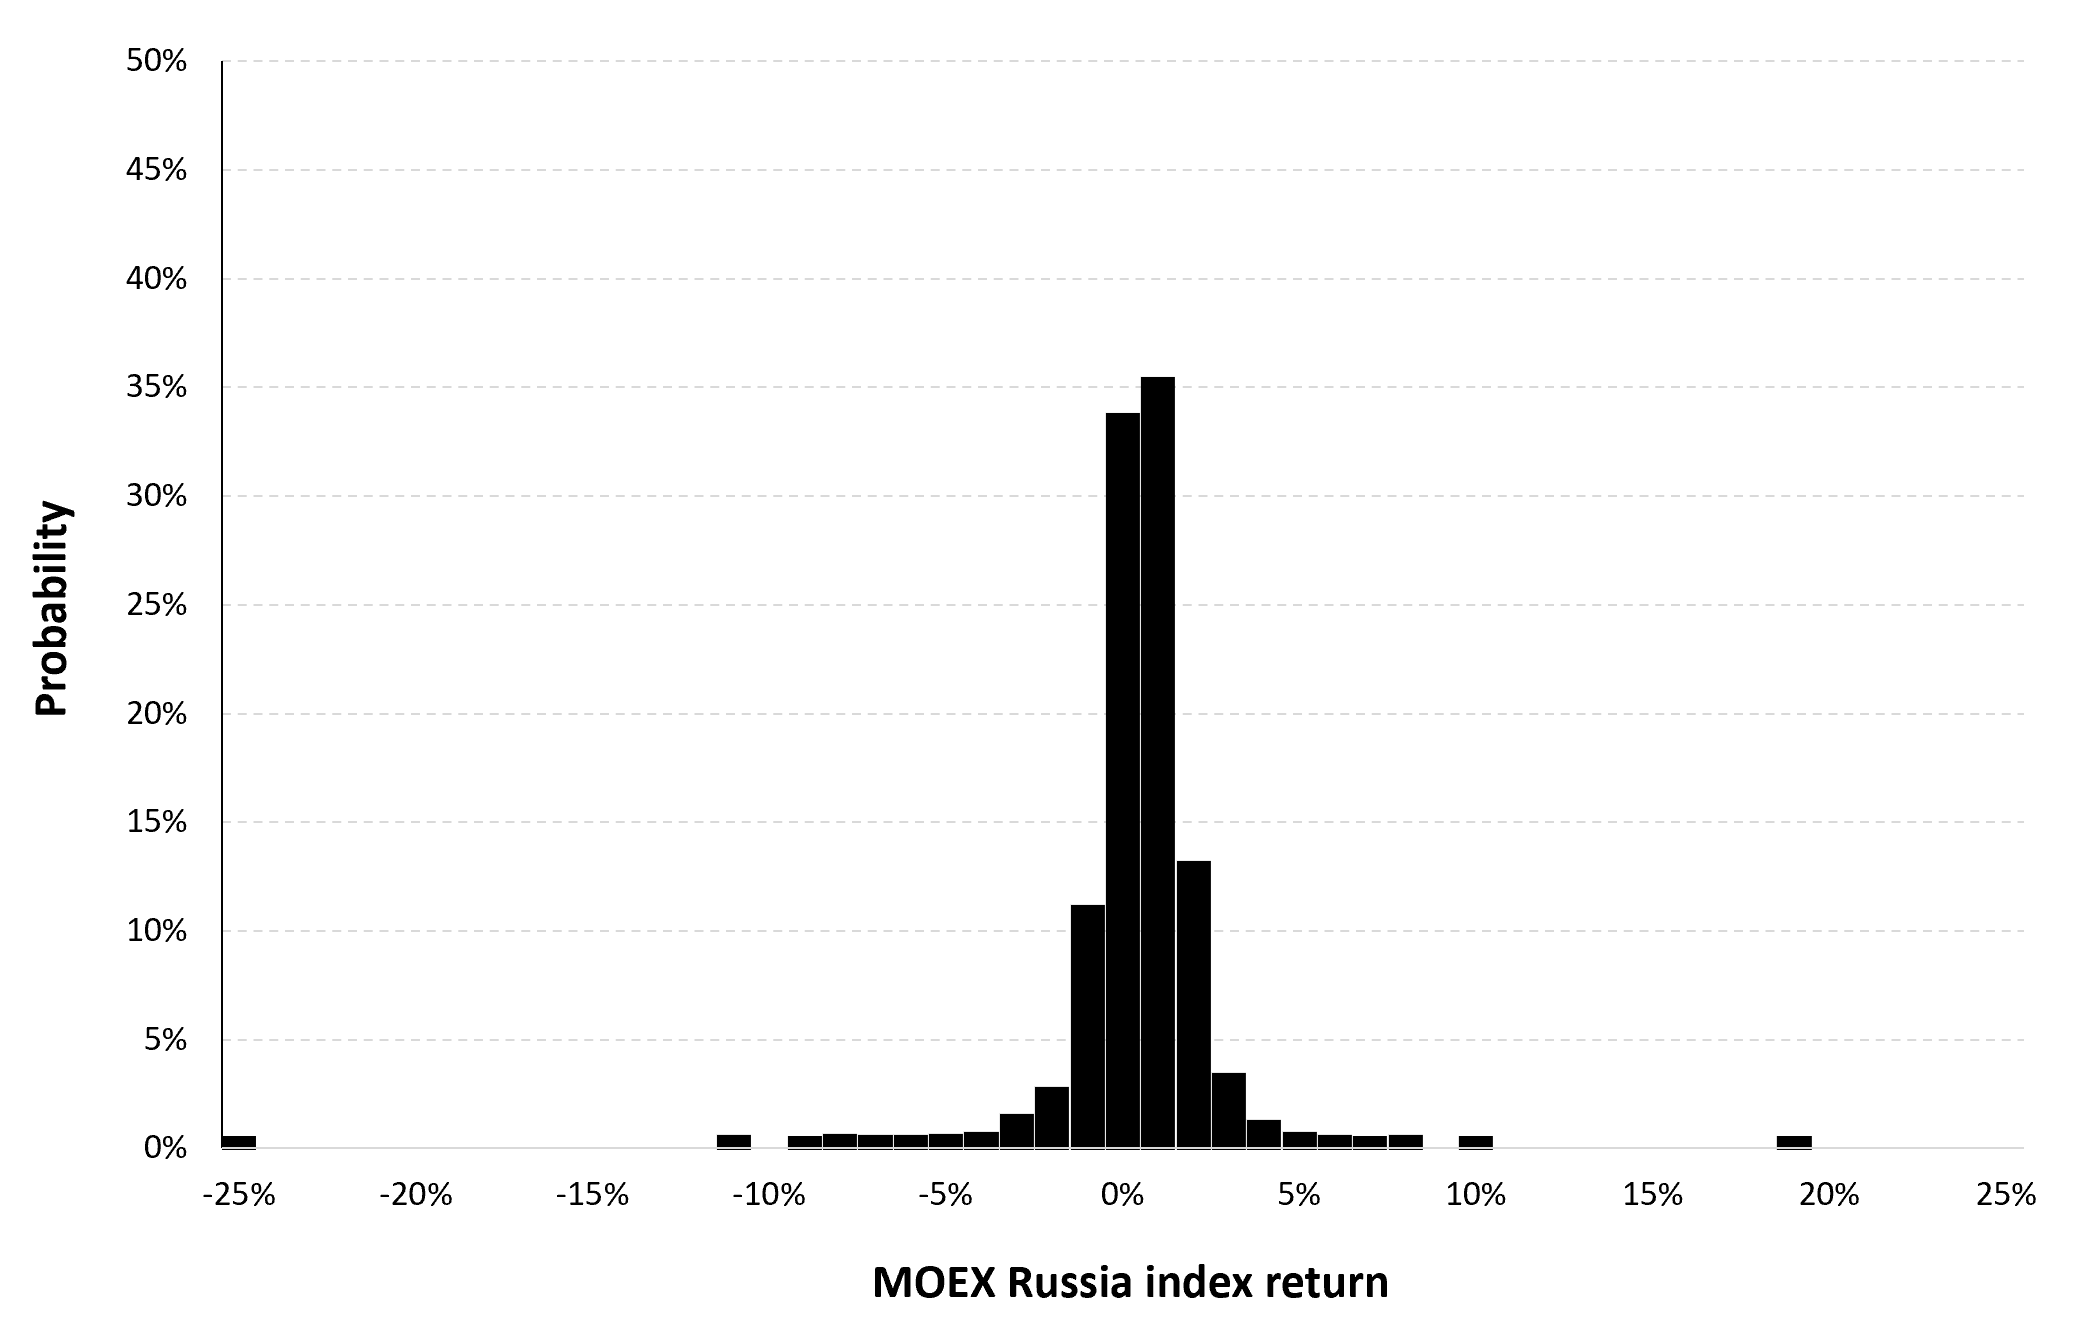 Historical distribution of the daily MOEX Russia index returns